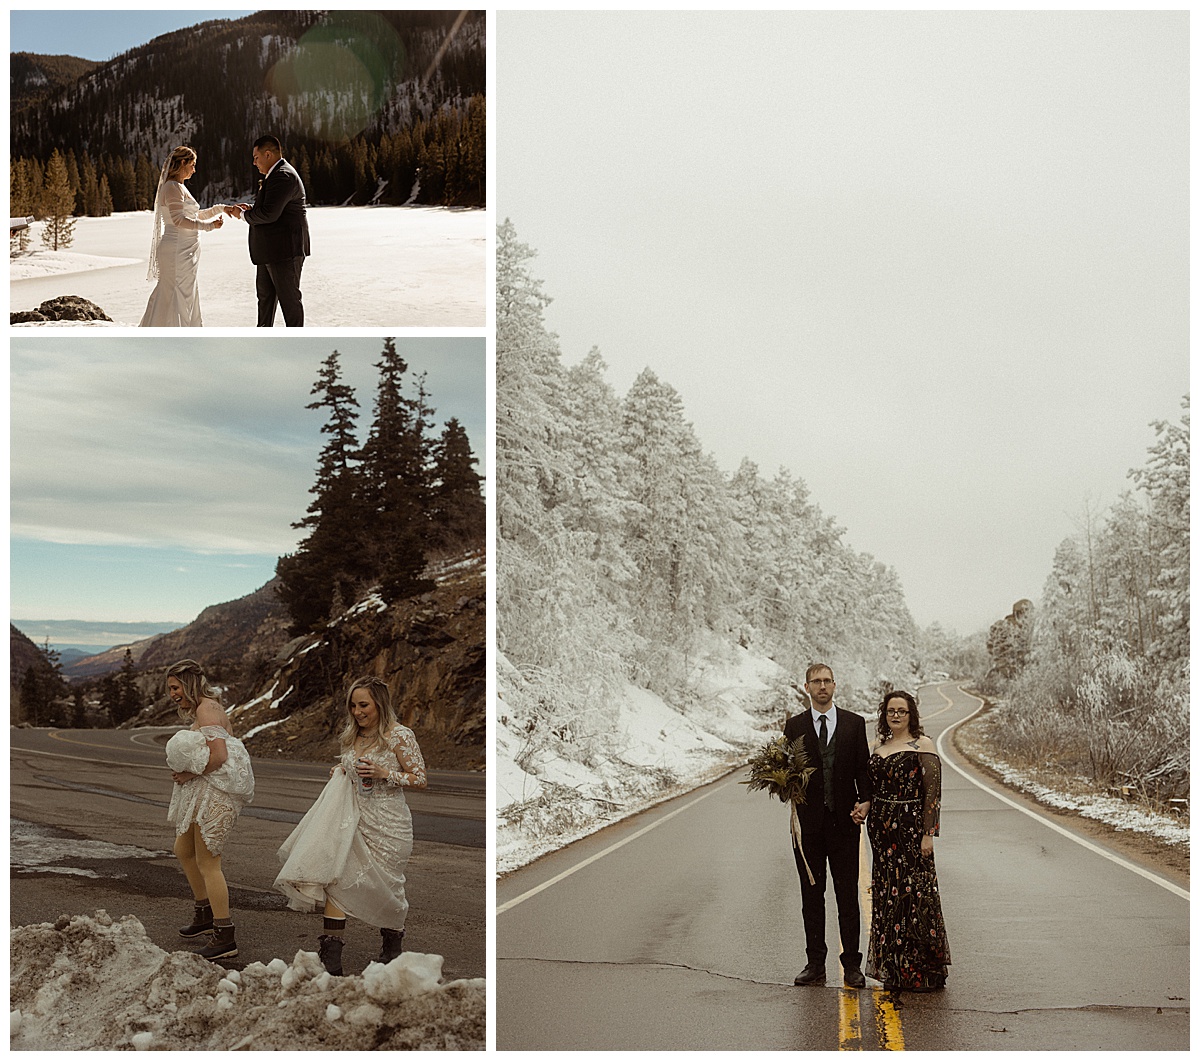 If you like snow, the best time to elope in Colorado is the winter.